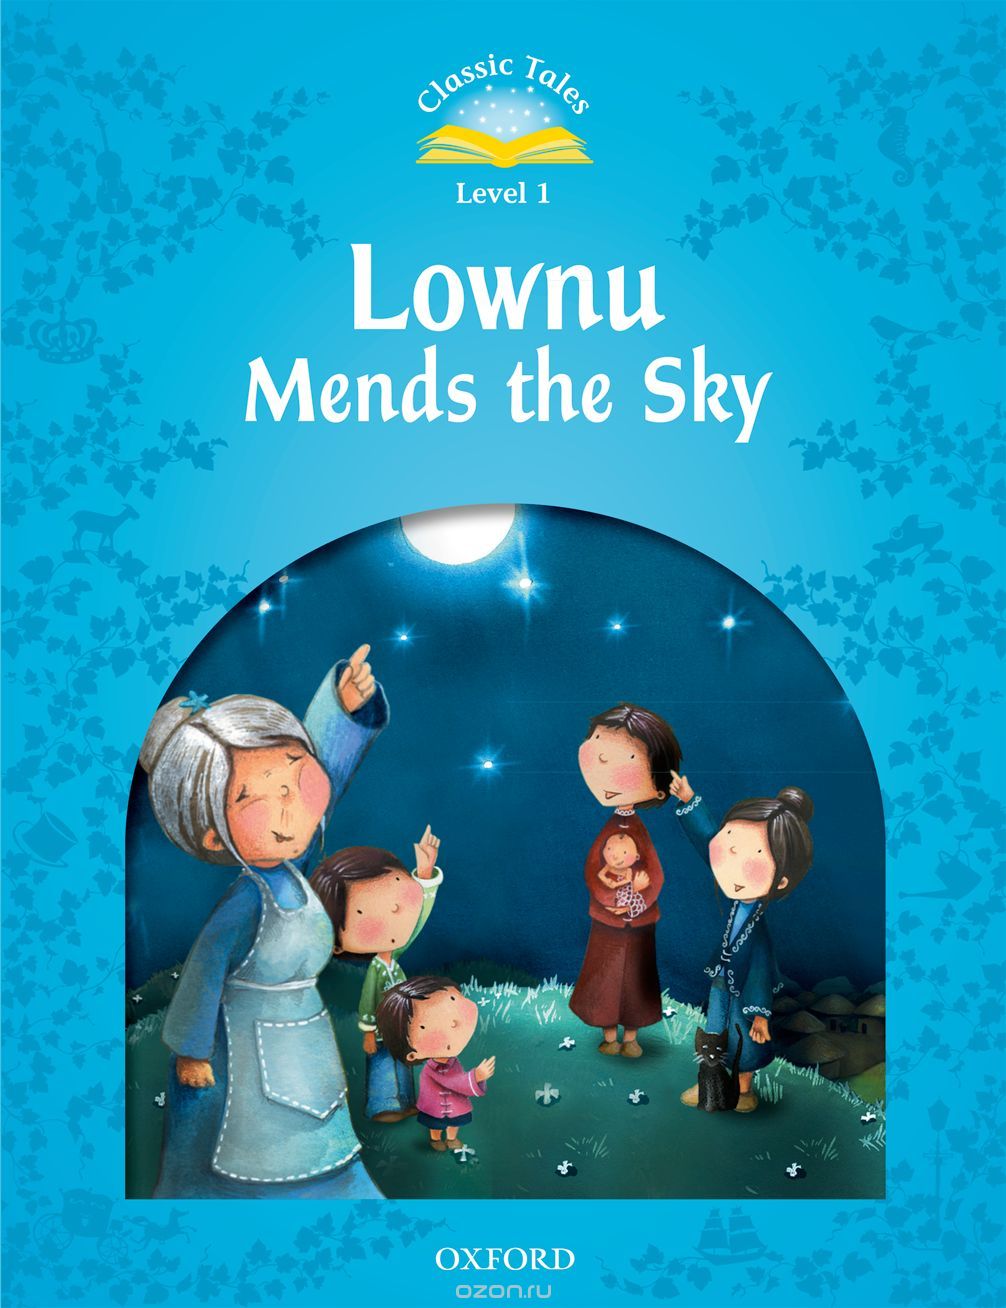 Classic tales LEVEL 1 LOWNU MENDS THE SKY 2Ed